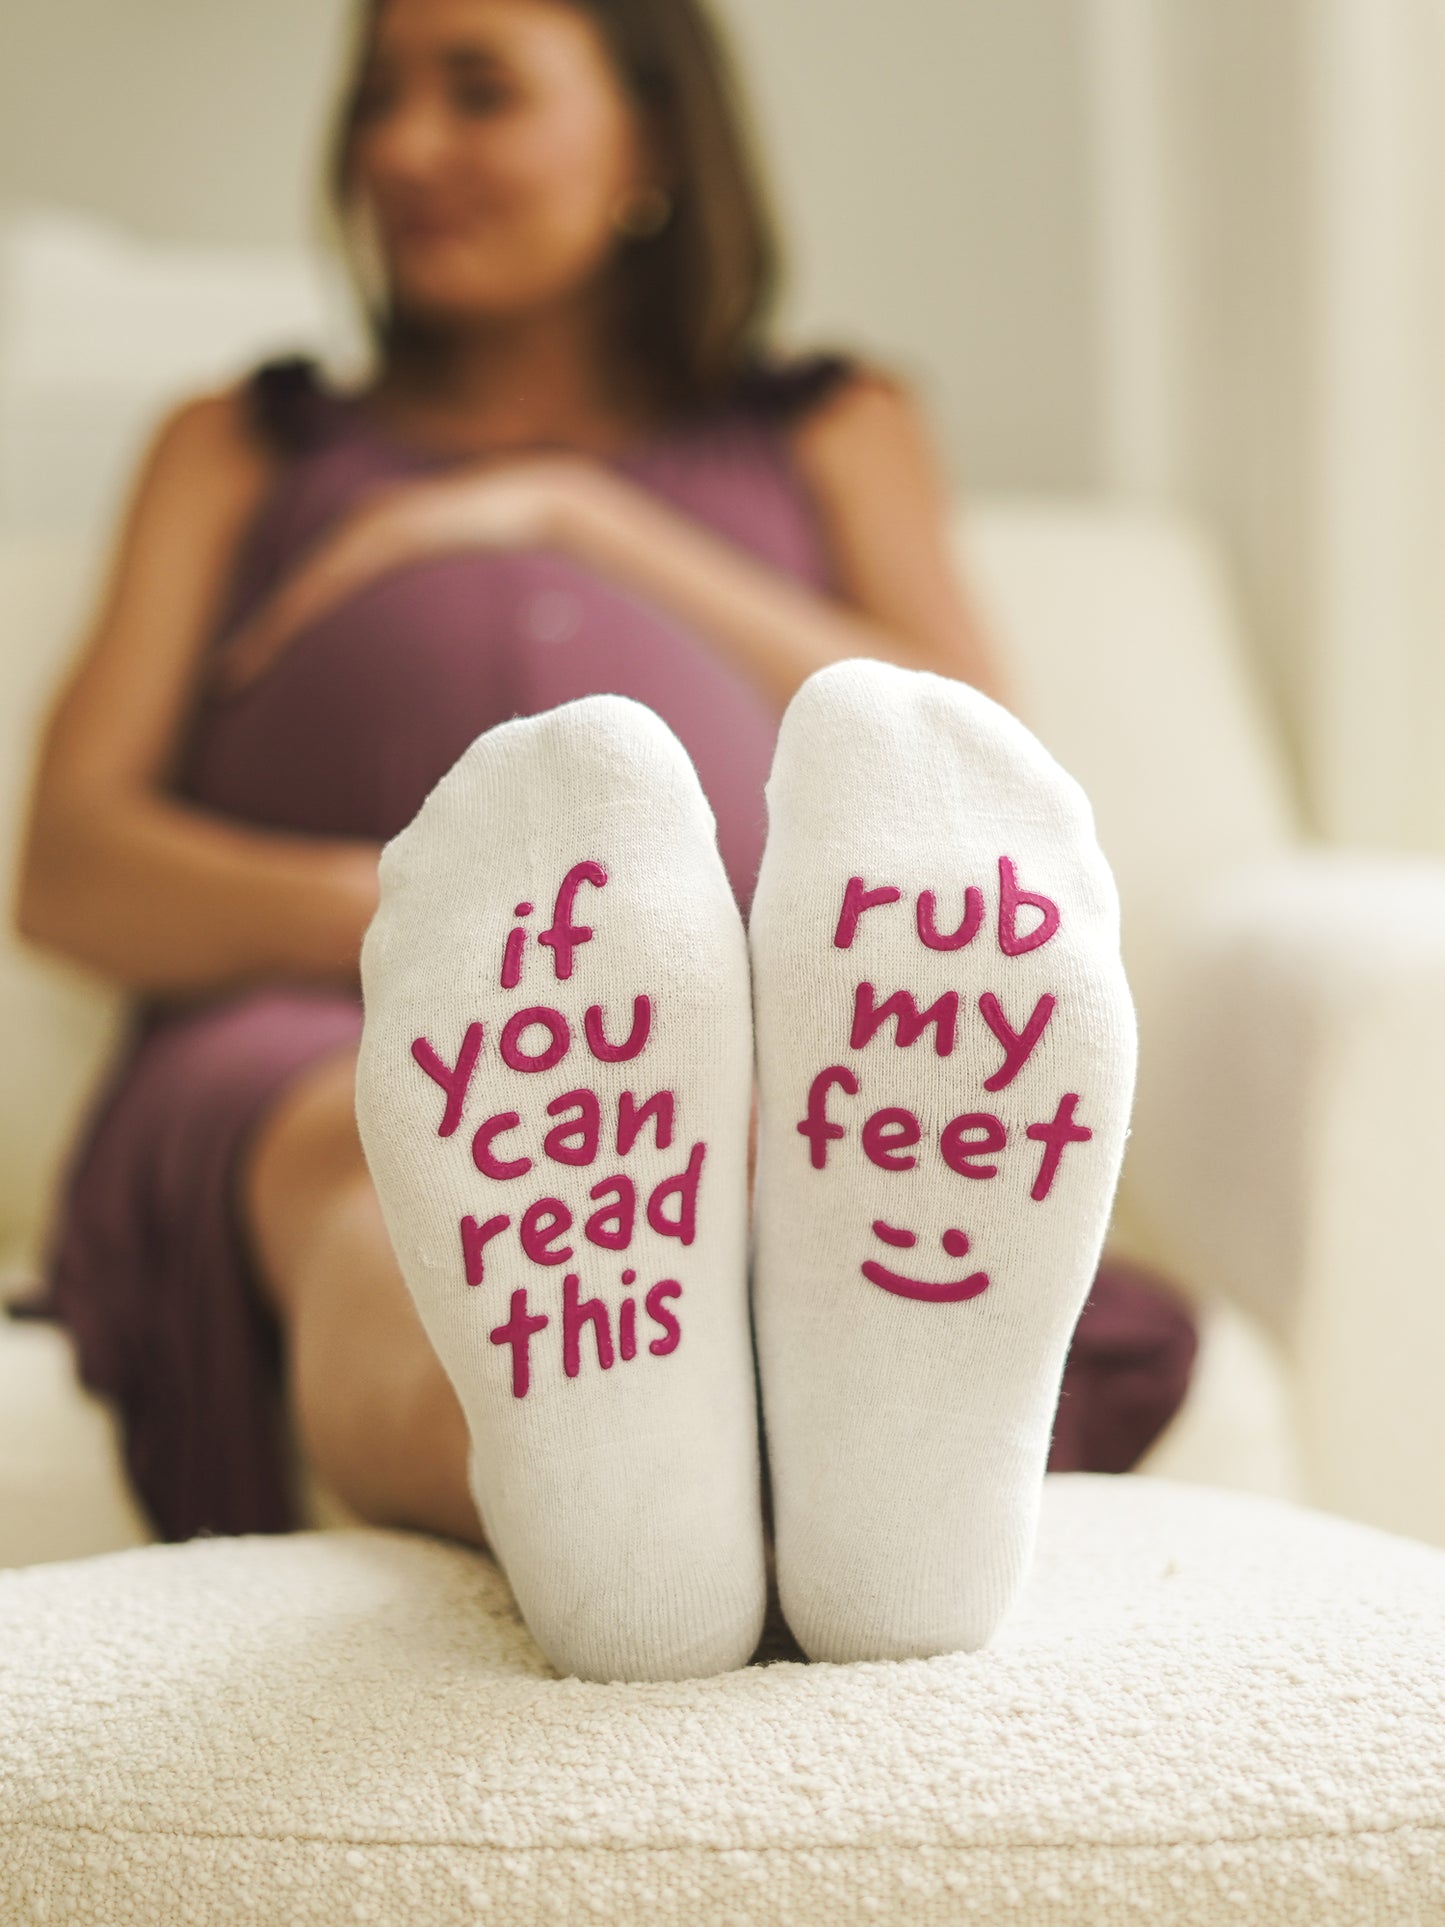 Model wearing Rub Met Feet Labor & Delivery Socks sitting on chair with feet up on ottoman